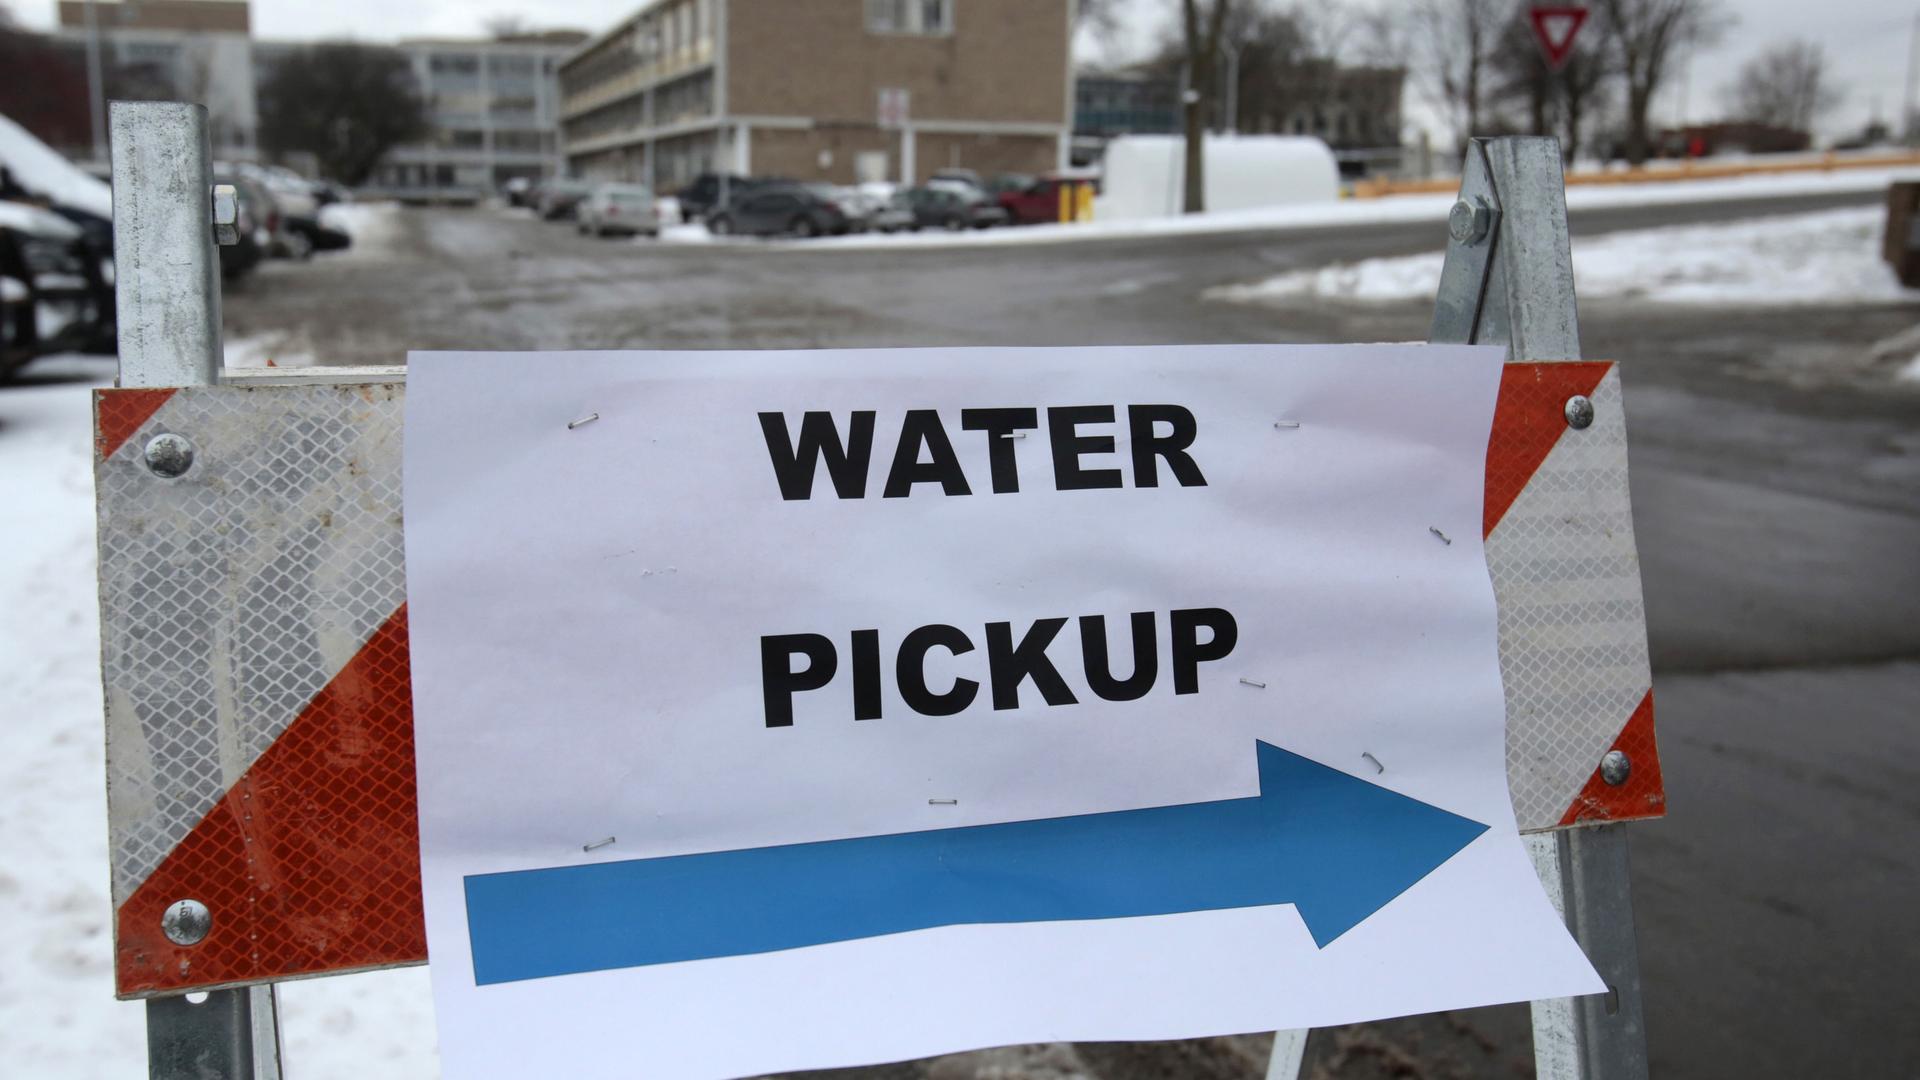 A "Water Pickup" sign points to a bottled water distribution center in Flint, Michigan in January. In an effort to save money, state officials running Flint's affairs implemented changes to the city's water system that resulted in widespread lead contamin